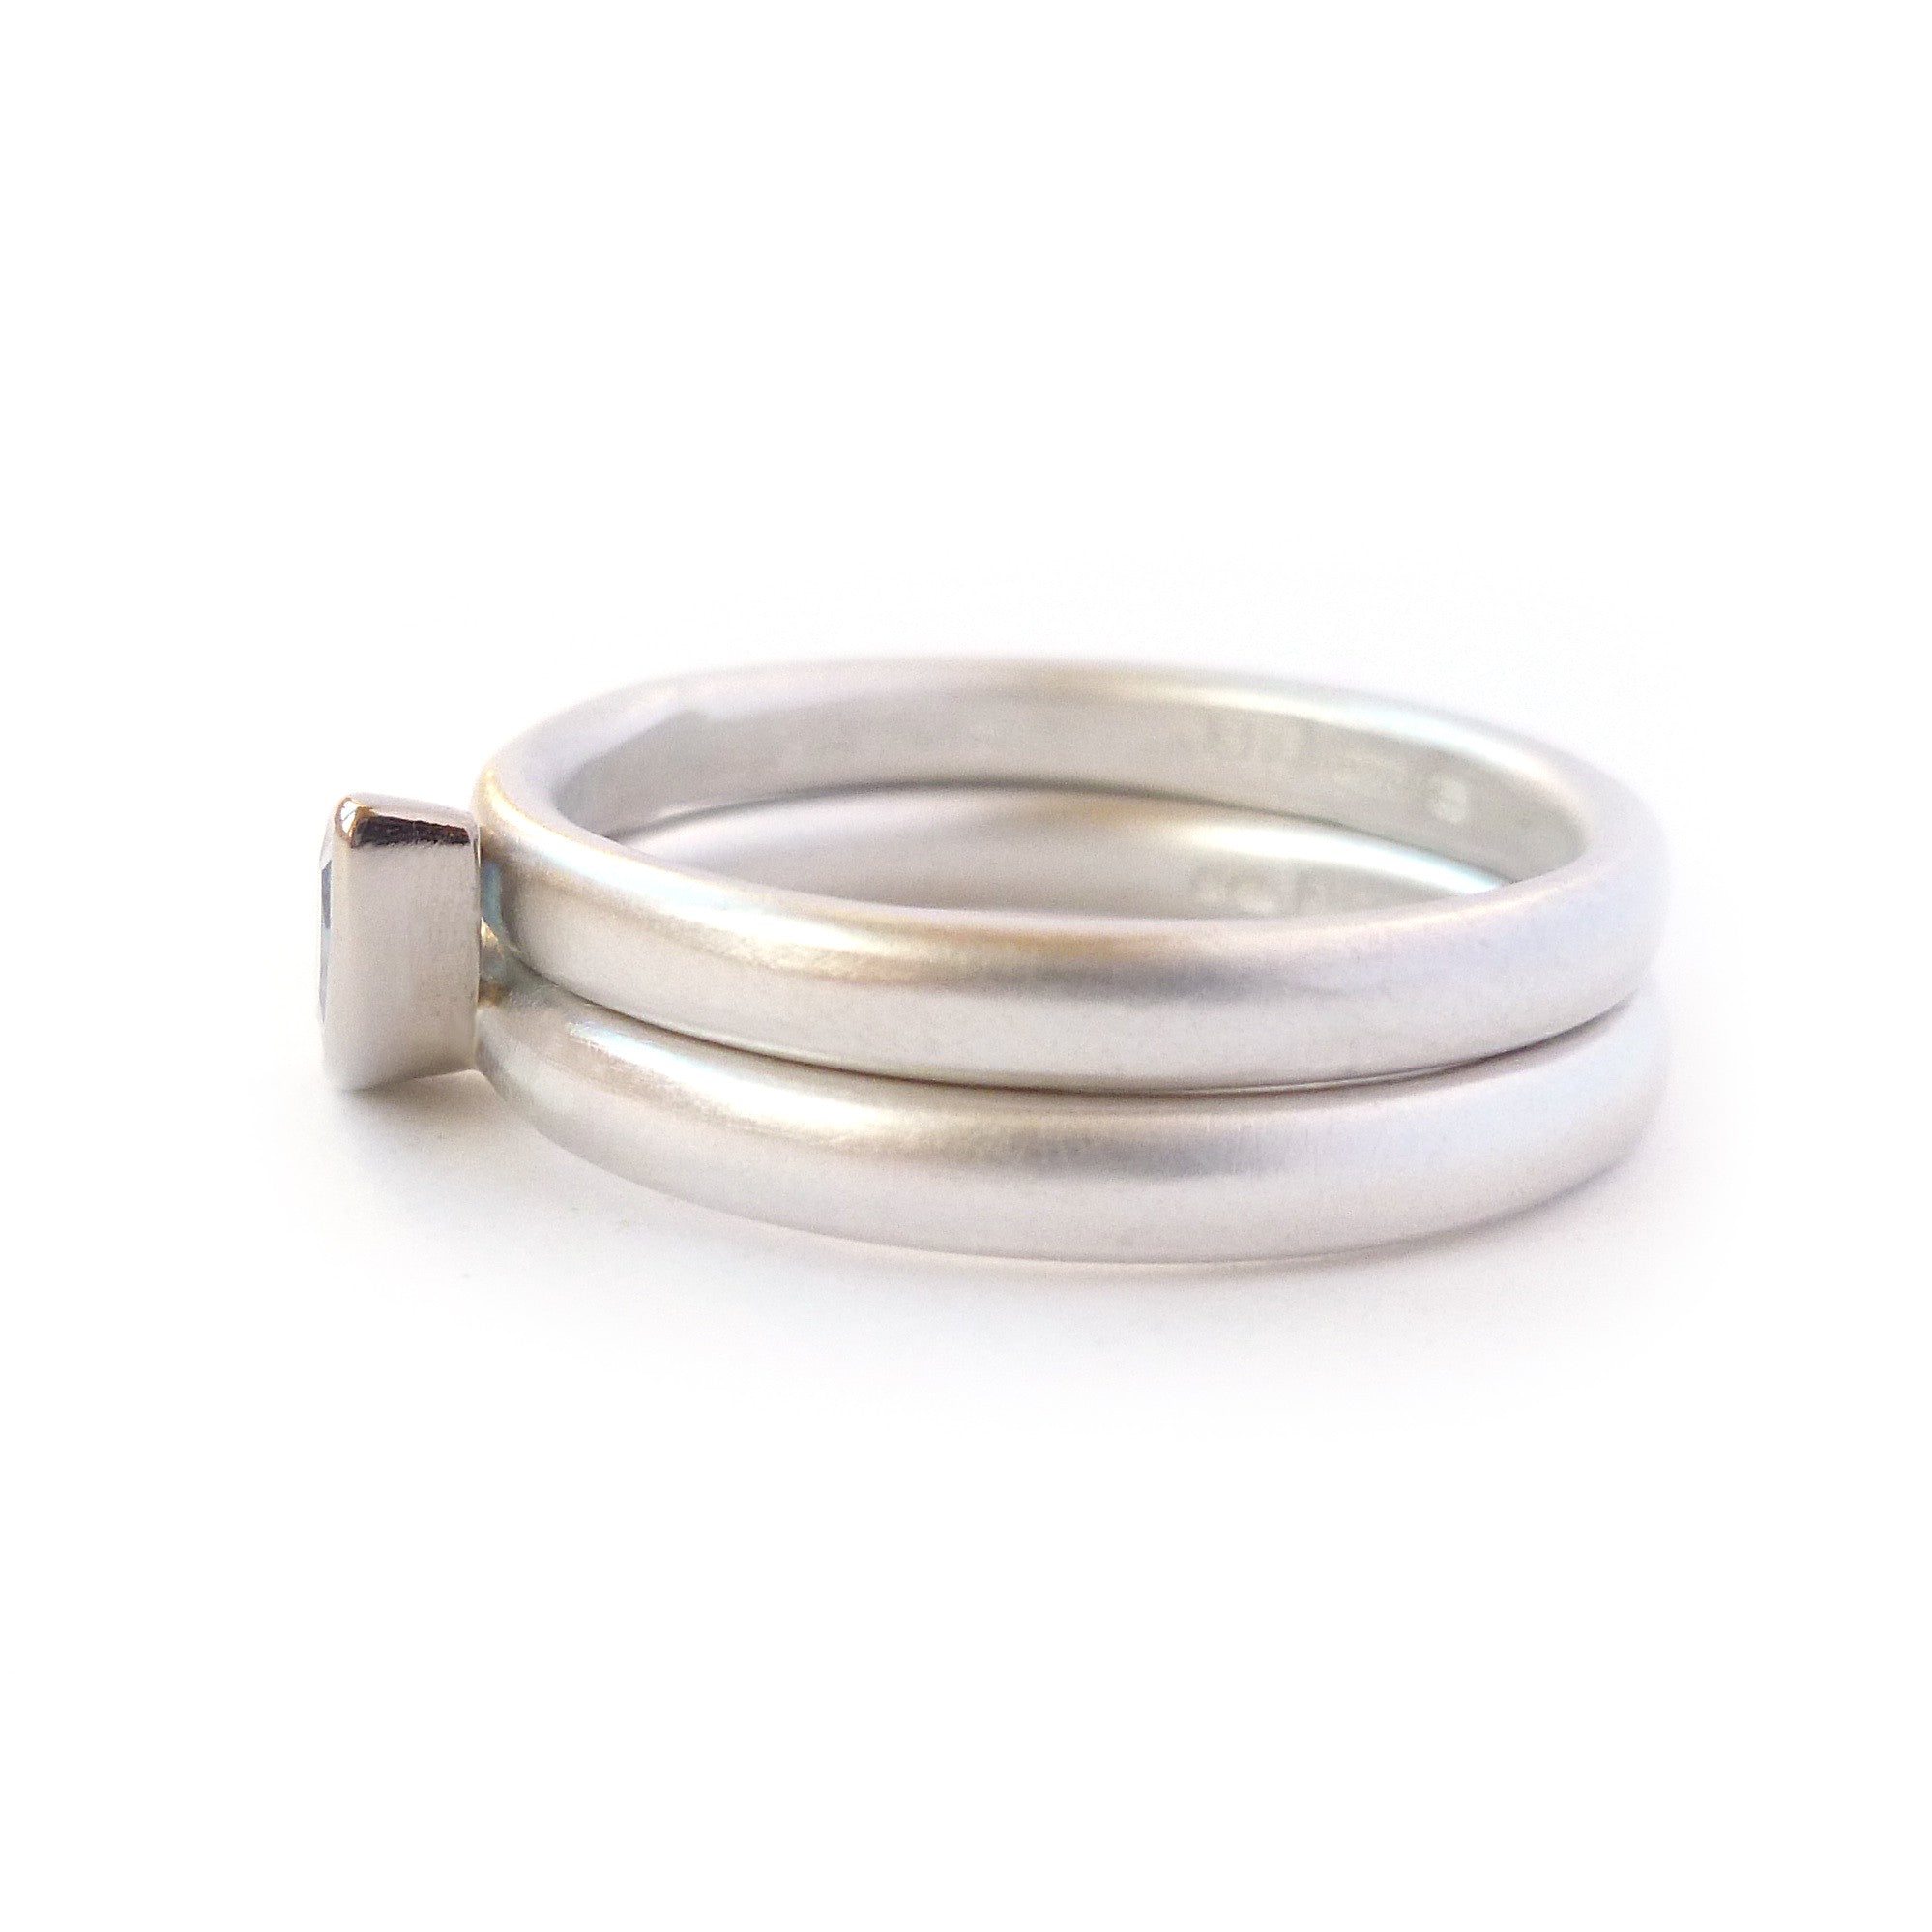 Silver ring - simple and subtle